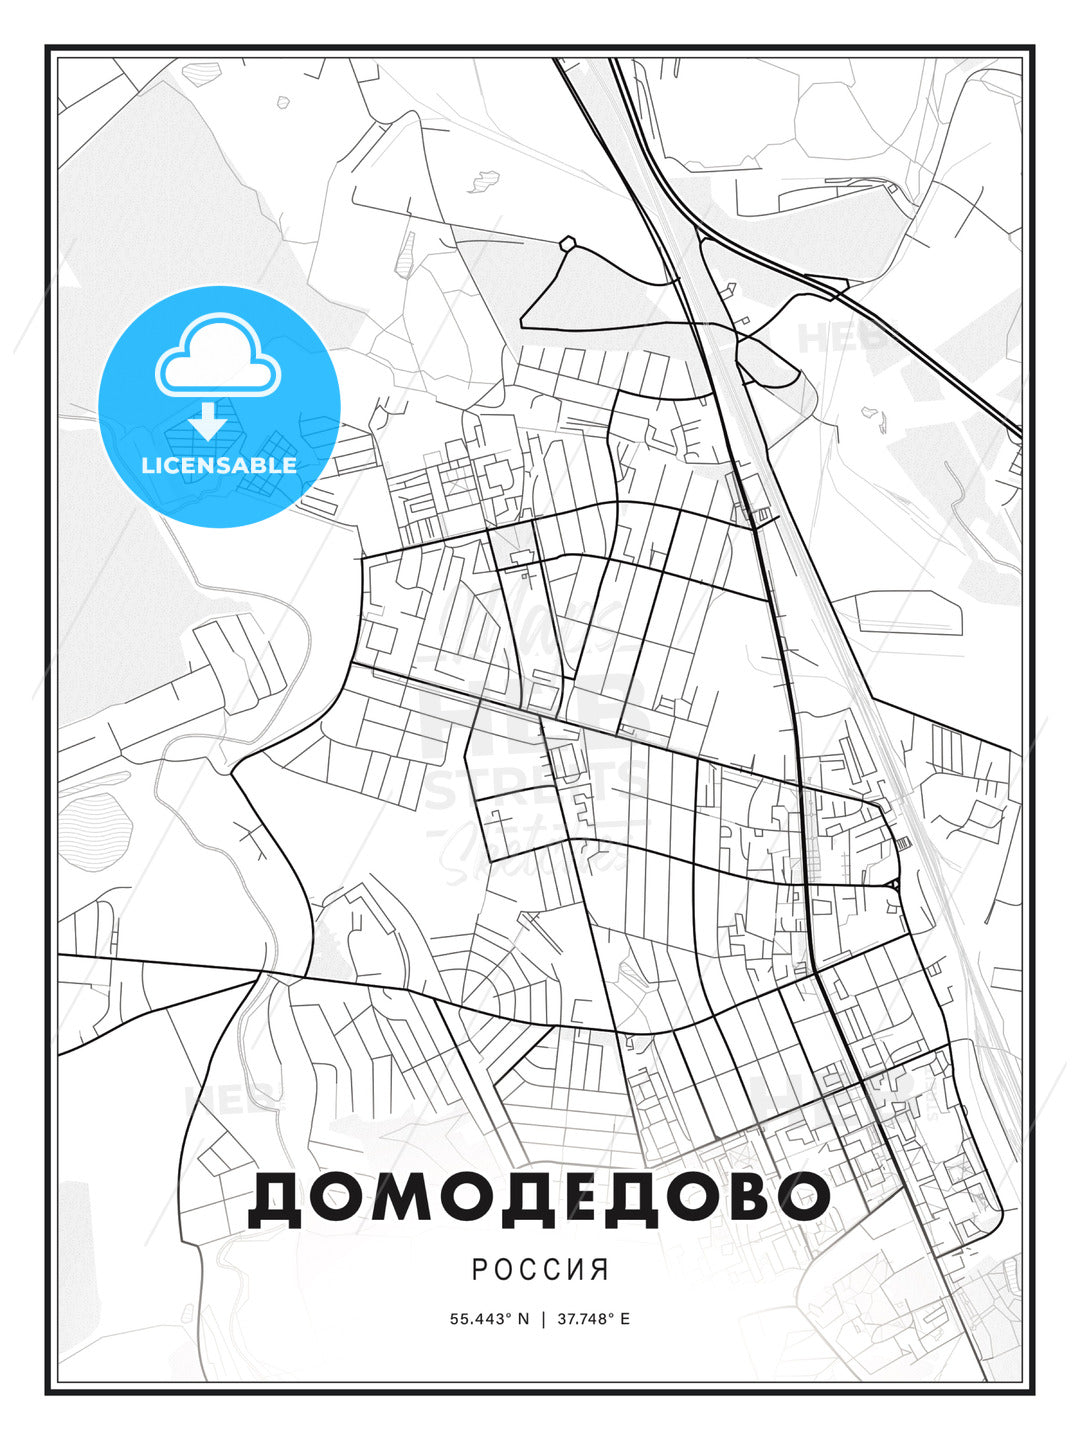 ДОМОДЕДОВО / Domodedovo, Russia, Modern Print Template in Various Formats - HEBSTREITS Sketches